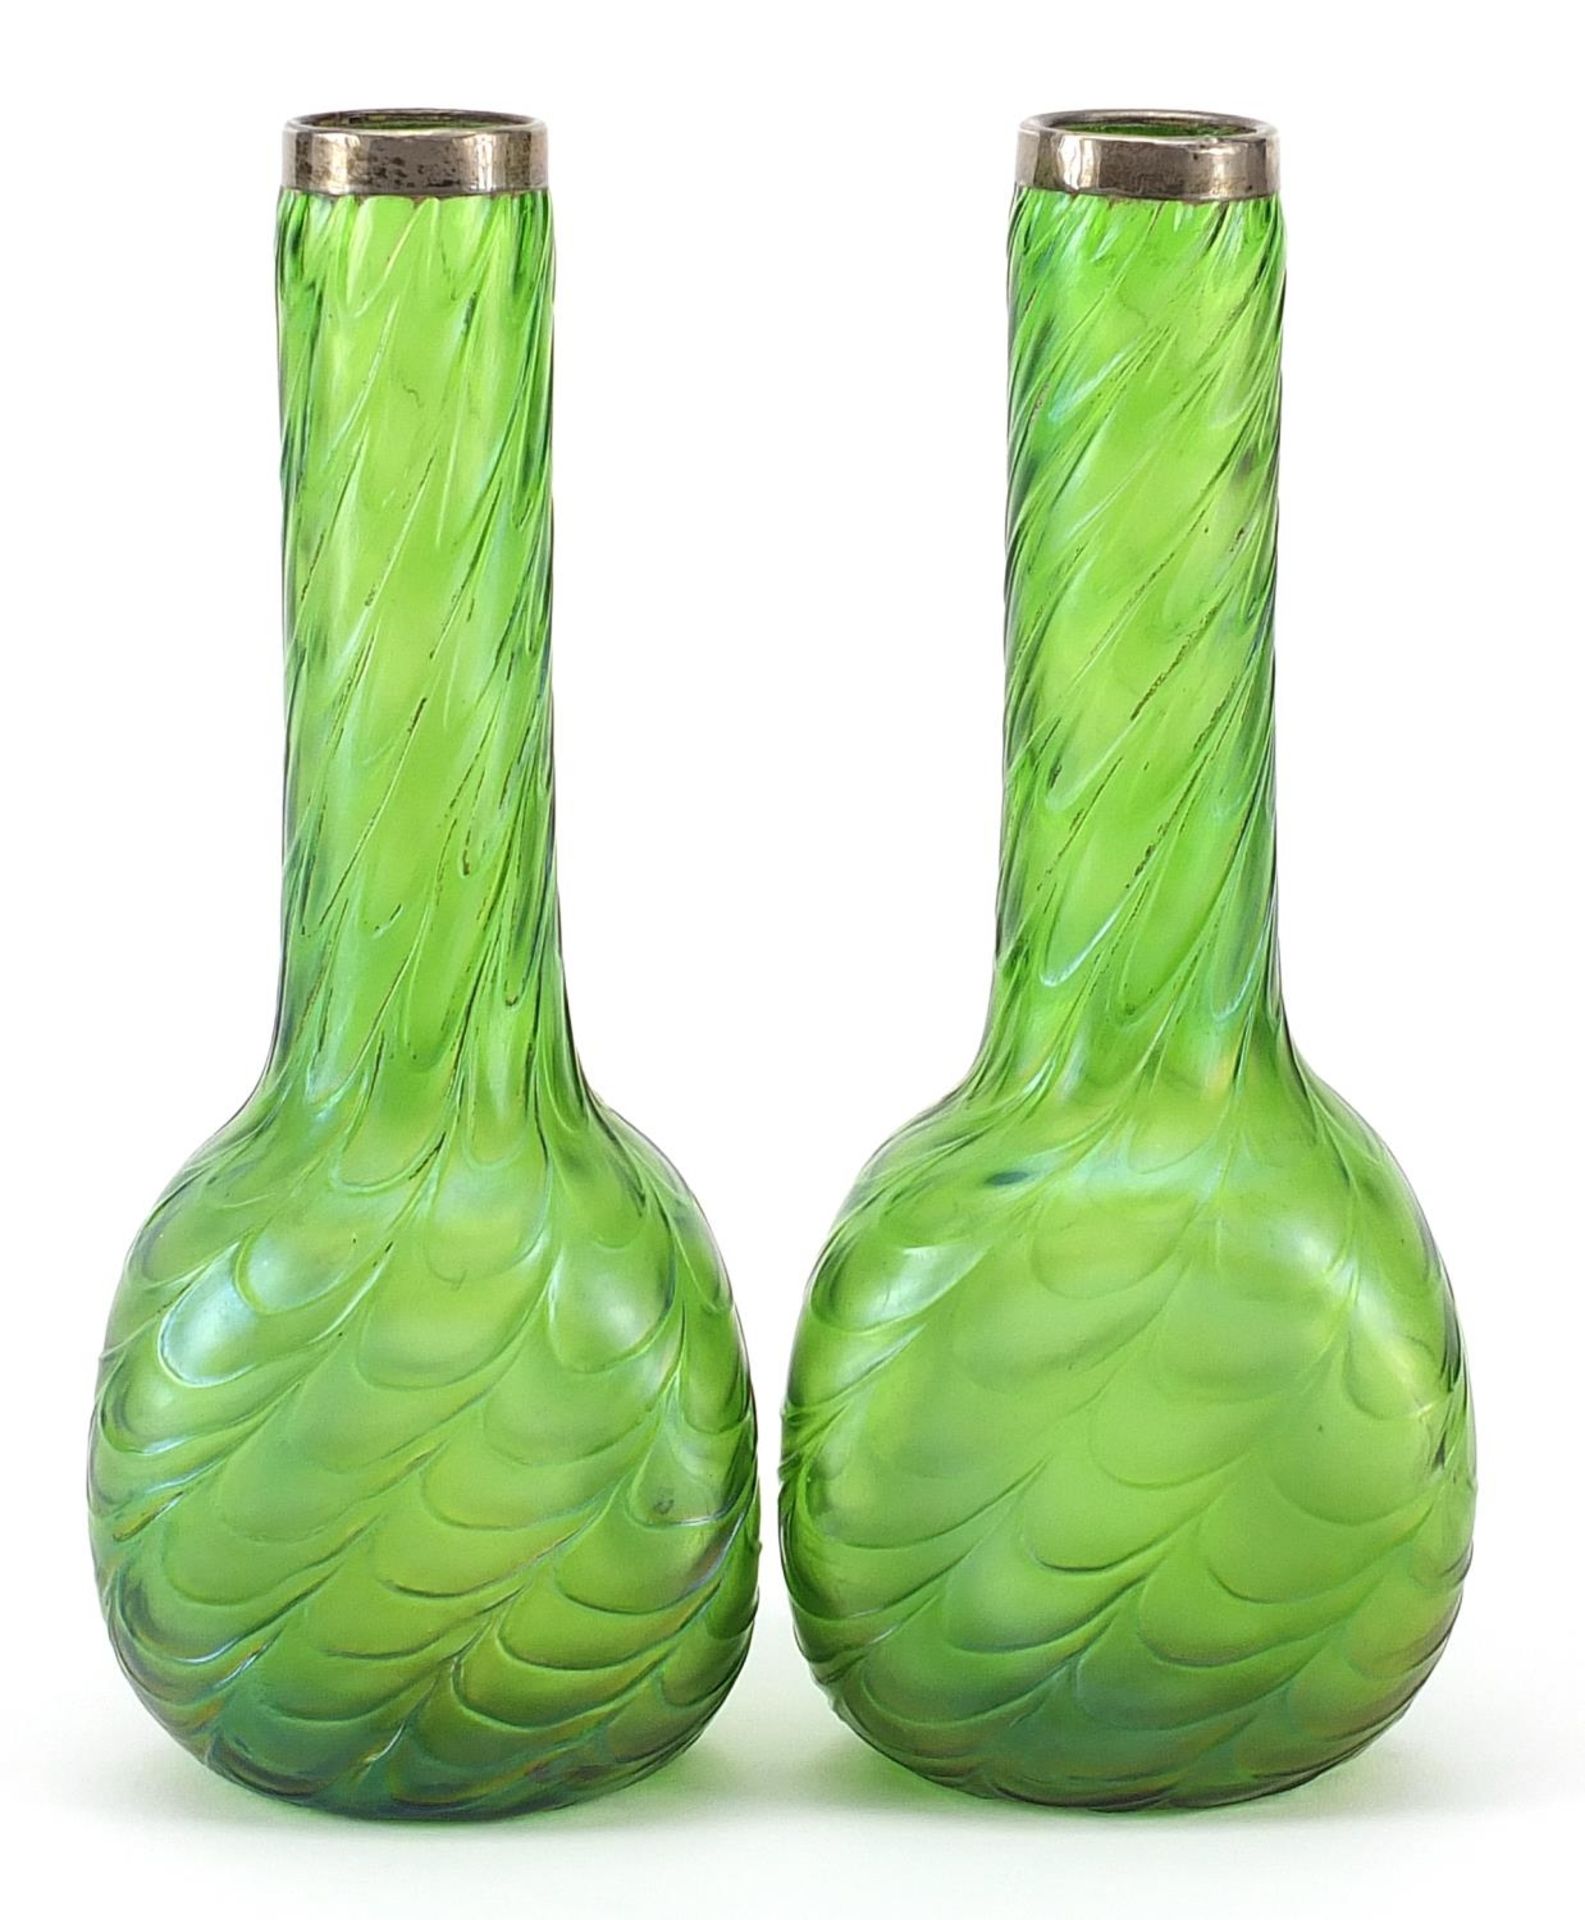 Pair of Art Nouveau green iridescent glass vases with silver rims in the style of Loetz, each 19.5cm - Image 2 of 4